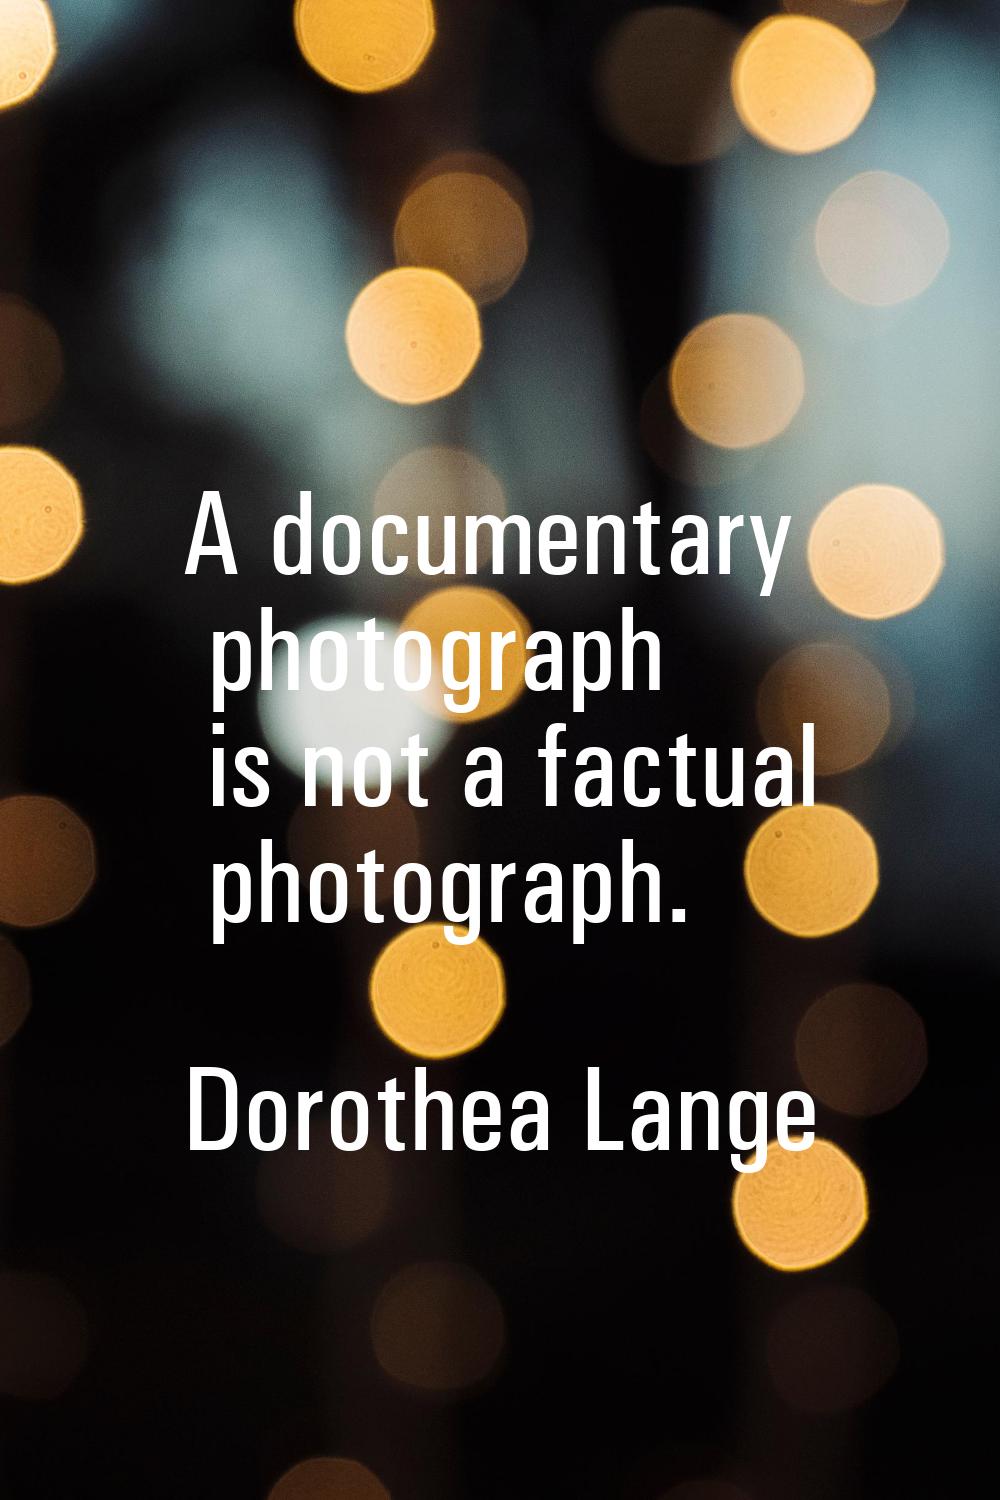 A documentary photograph is not a factual photograph.